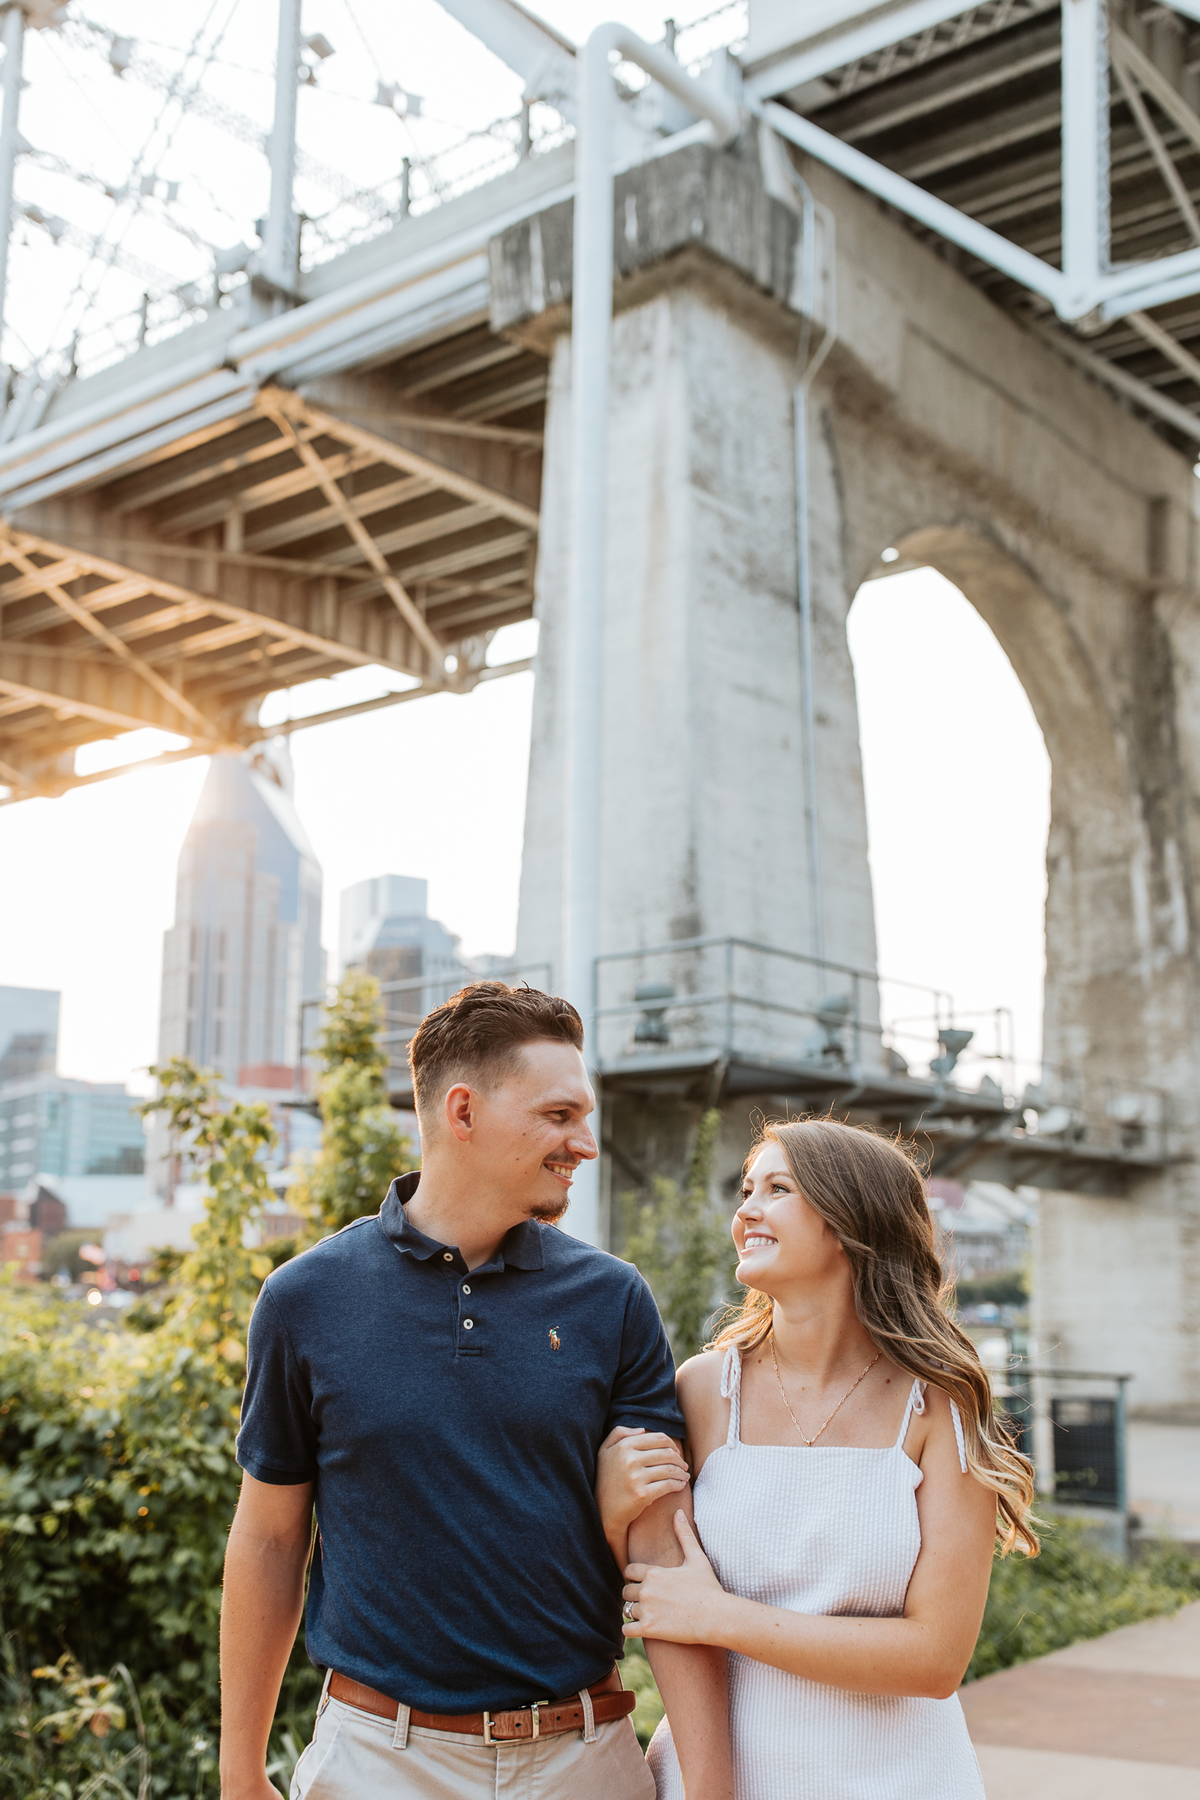 Nashville Pedestrian Bridge and Centenniel Park Engagement Session | Nashville, TN | Carly Crawford Photography | Knoxville and Tennessee Wedding, Couples, and Portrait Photographer-287120